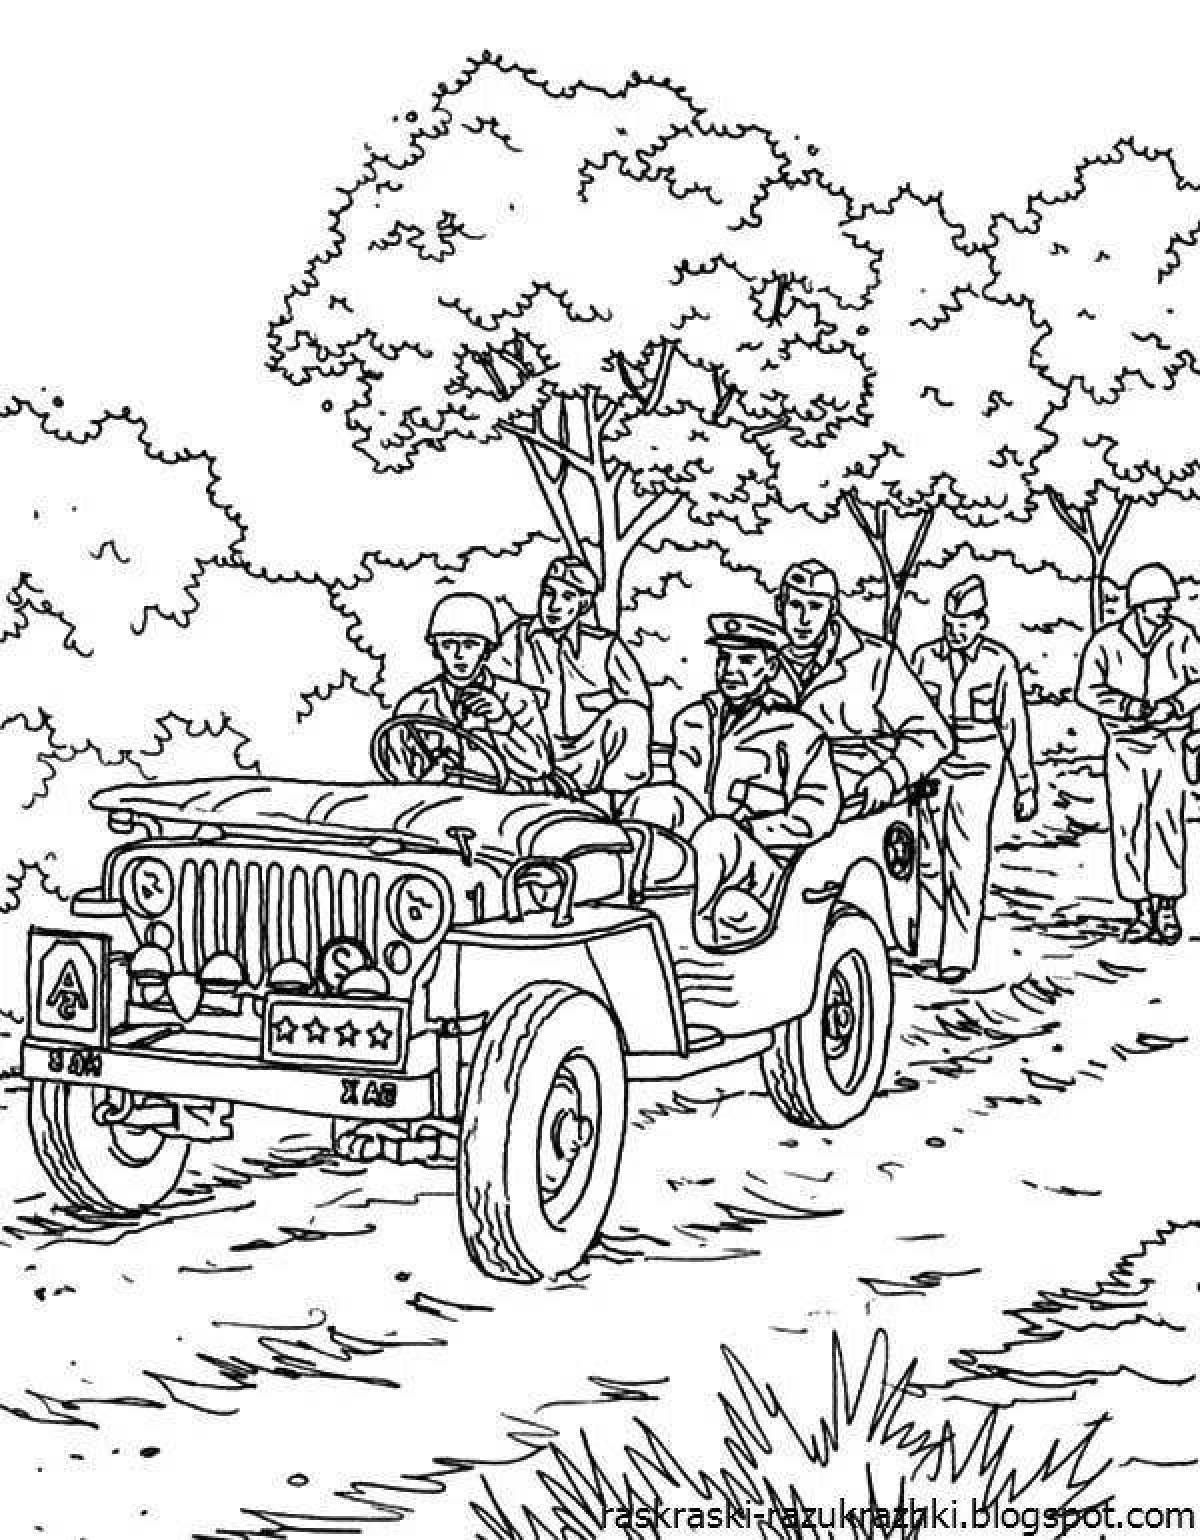 Great WWII coloring book